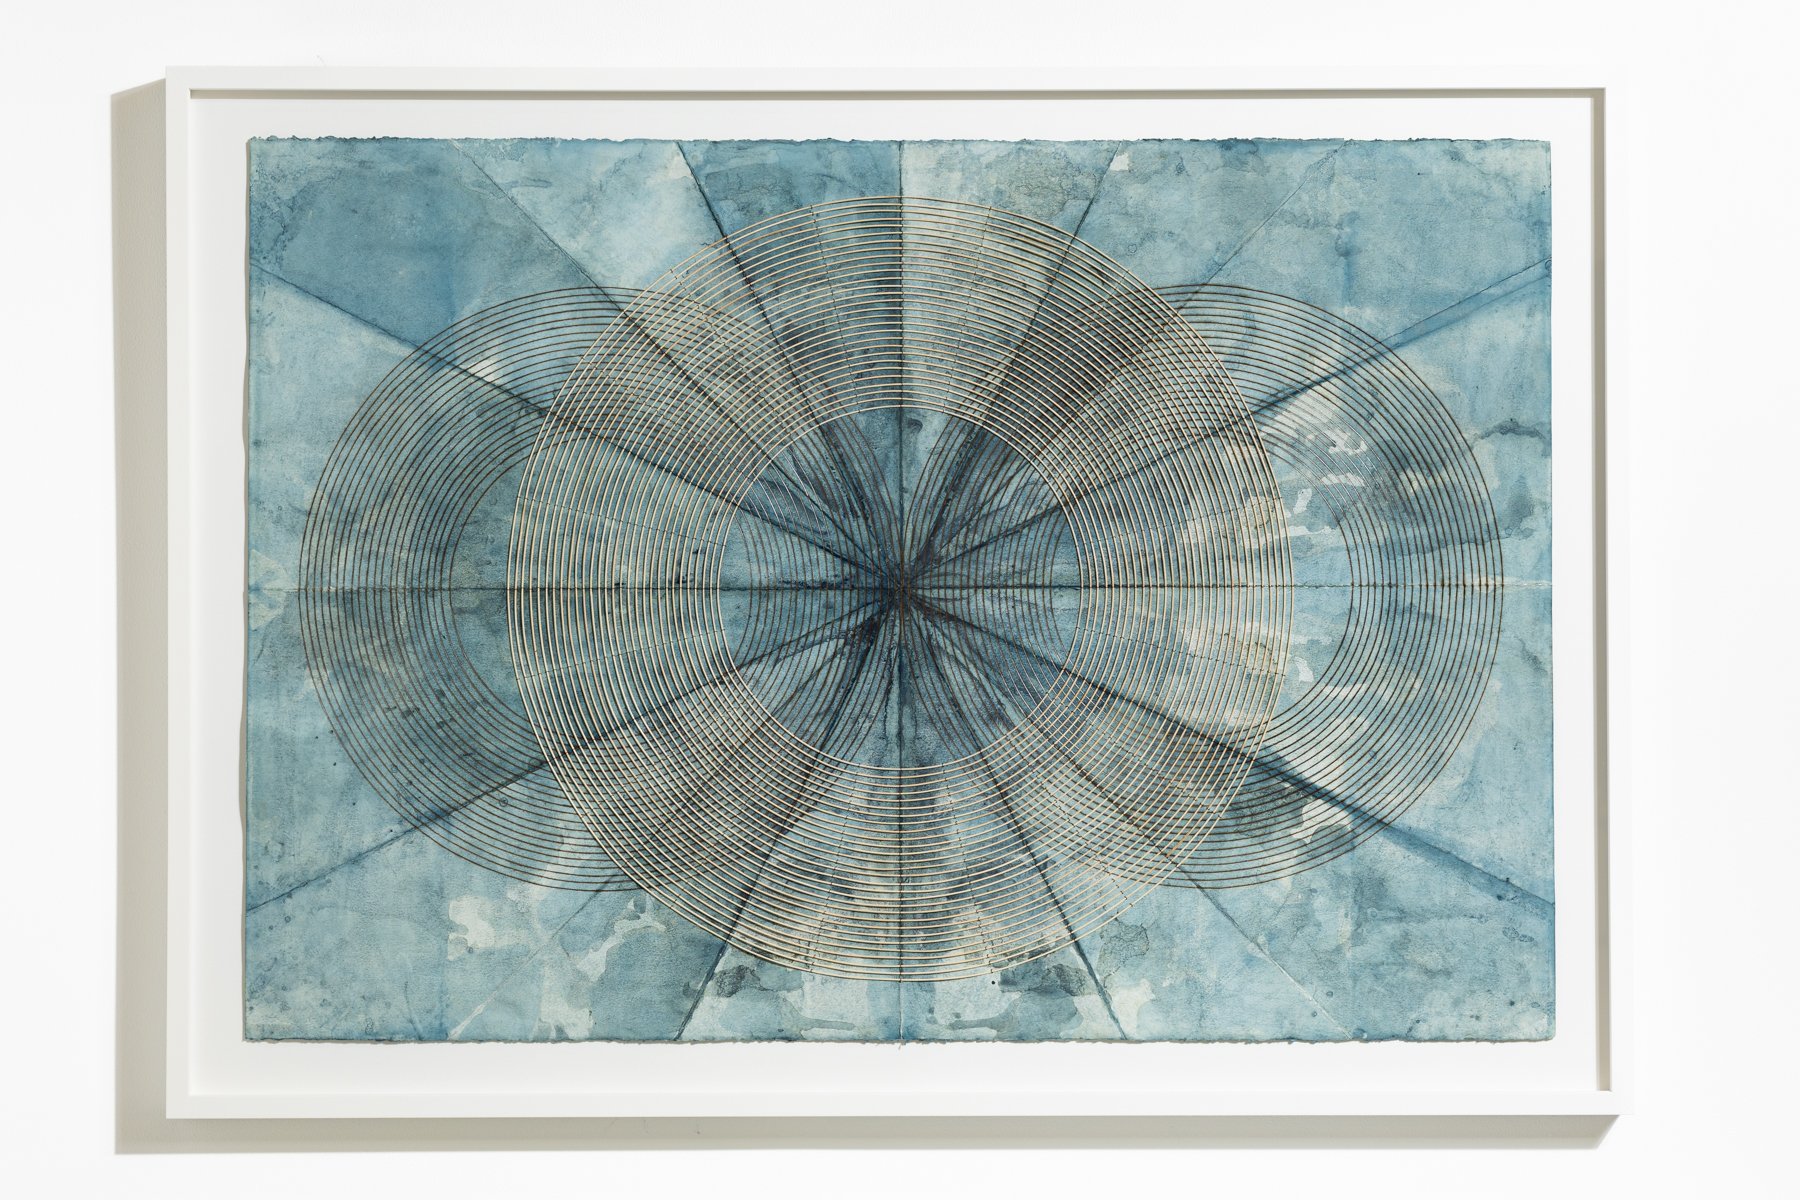 "Reflected Ripples" Geometric Art with Burned Lines and Dyed Reeds on Paper by Katrine Hildebrandt-Hussey @ Soapbox Arts Gallery, Burlington, VT